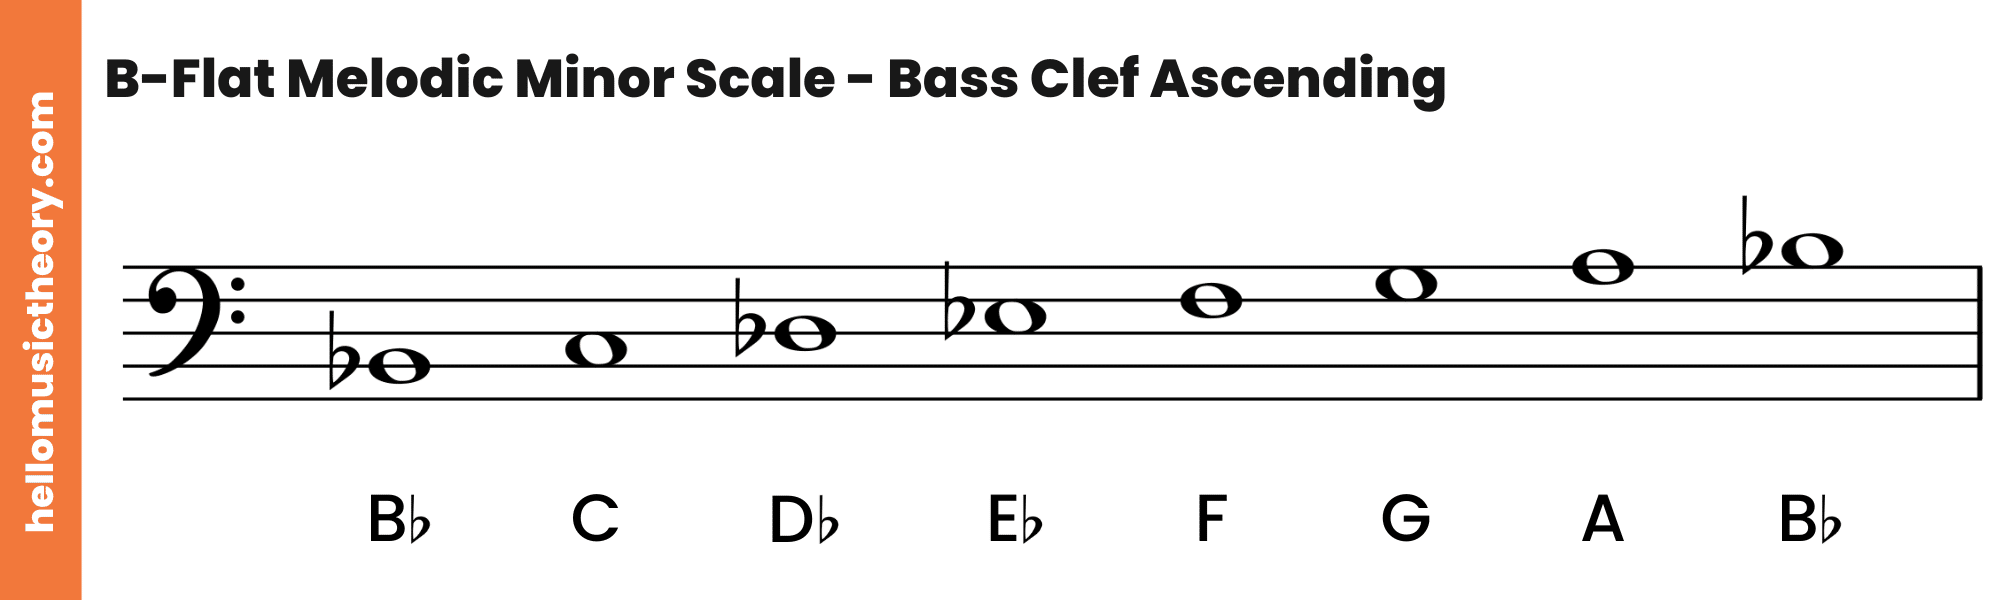 B-Flat Melodic Minor Scale Bass Clef Ascending